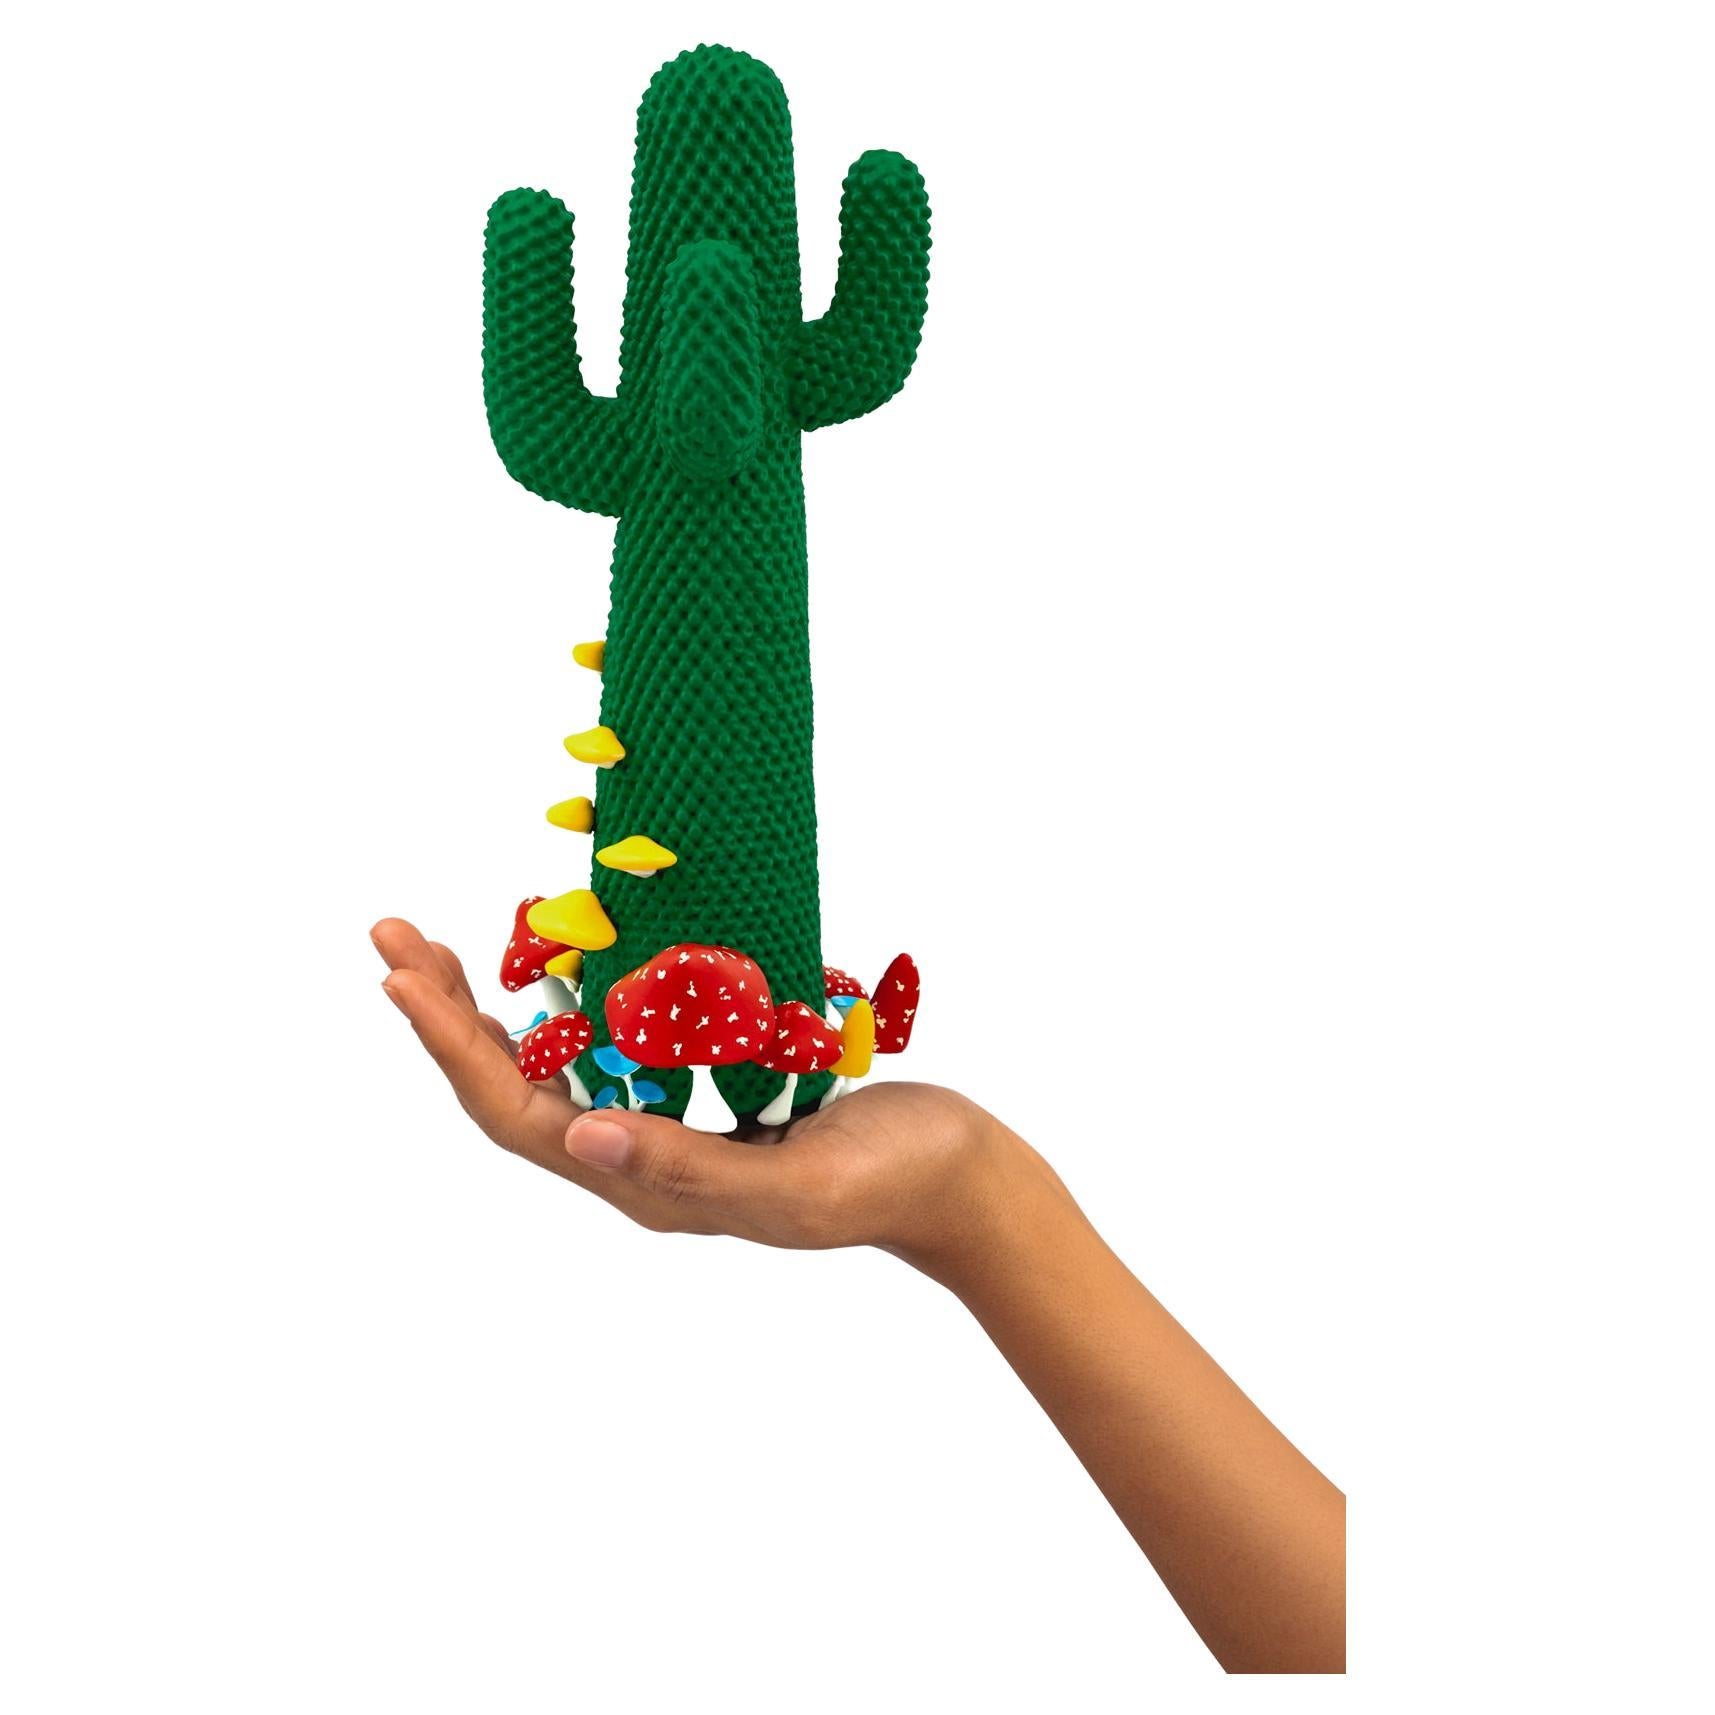 LIMITED EDITION #60/99

Gufram presents the miniaturised version of the Shroom CACTUS® created in collaboration with A$AP Rocky and the artist’s new design studio HOMMEMADE Exactly as the real-size Shroom CACTUS®, the new Guframini piece features